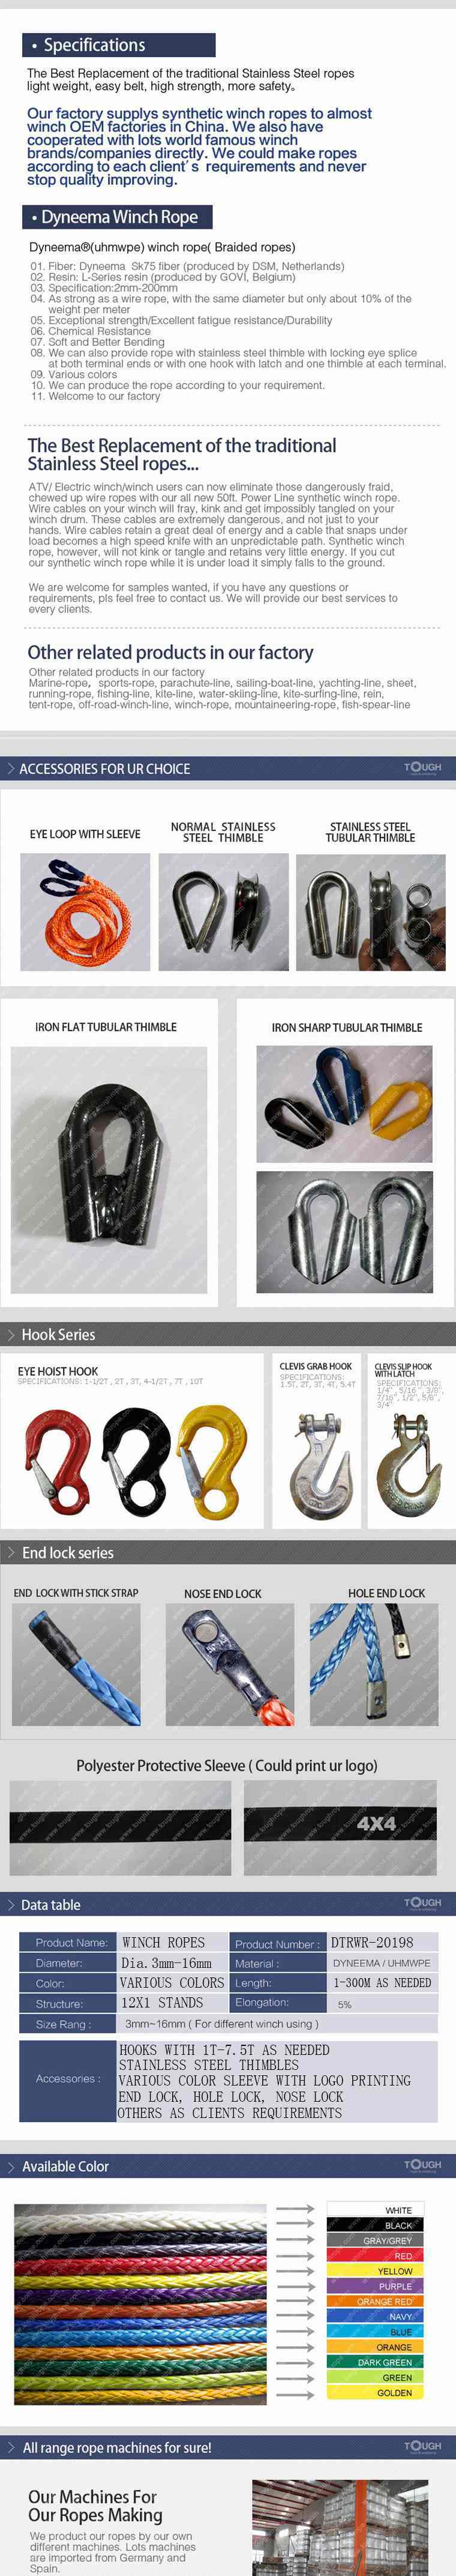 Color Winch Cable Accessories Winch Anchor Rope